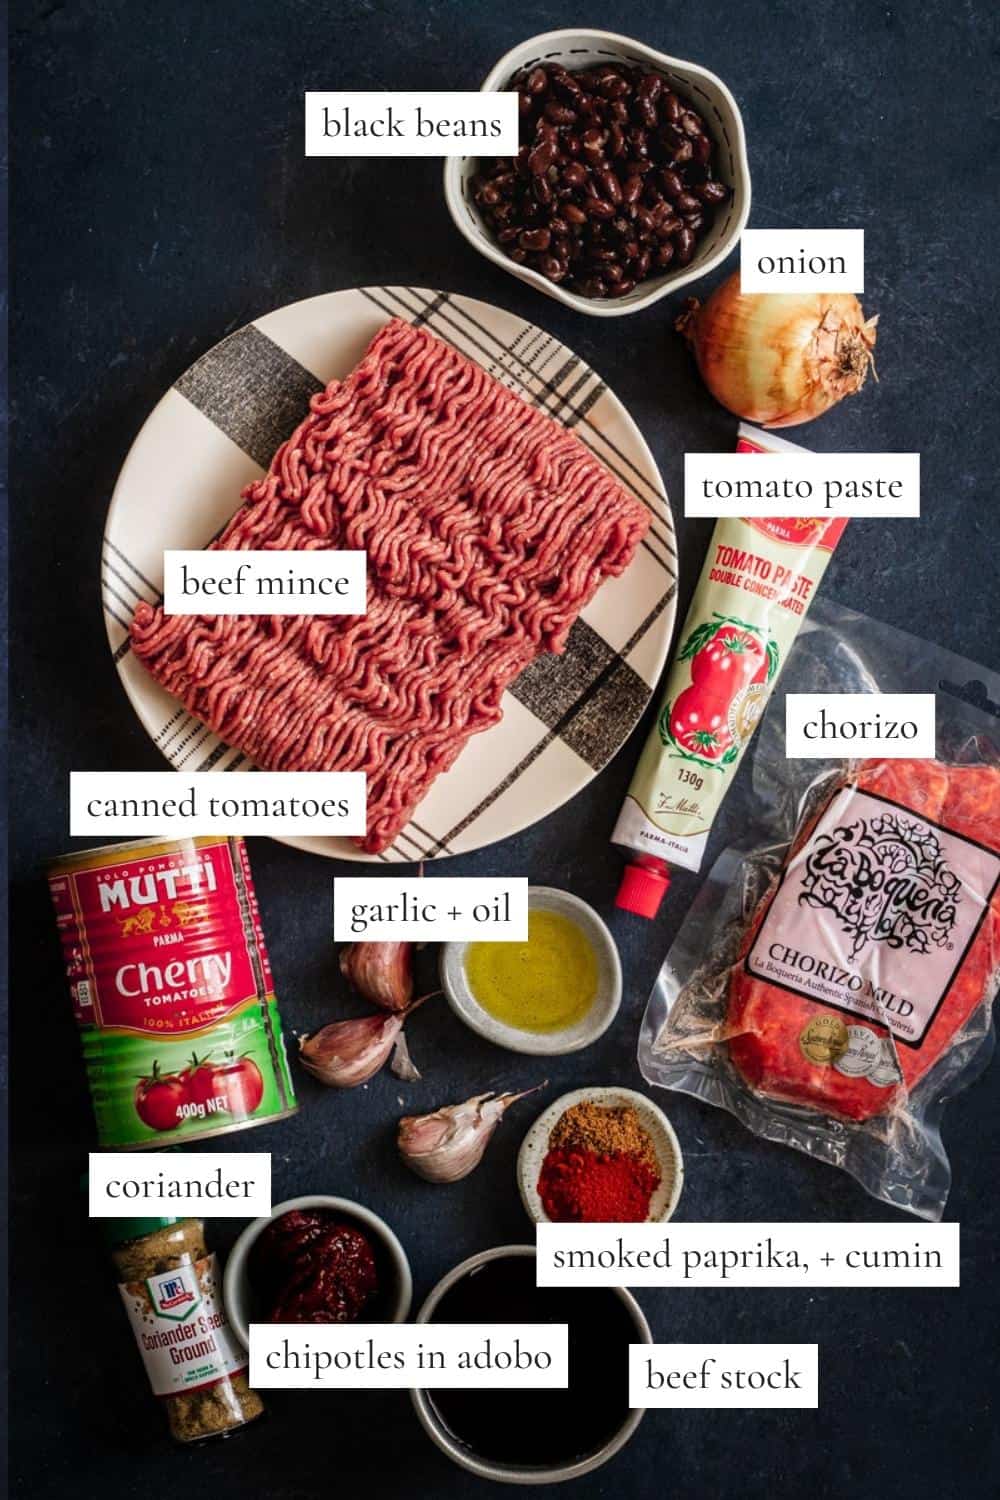 All the ingredients you need to make dutch oven chili con carne.